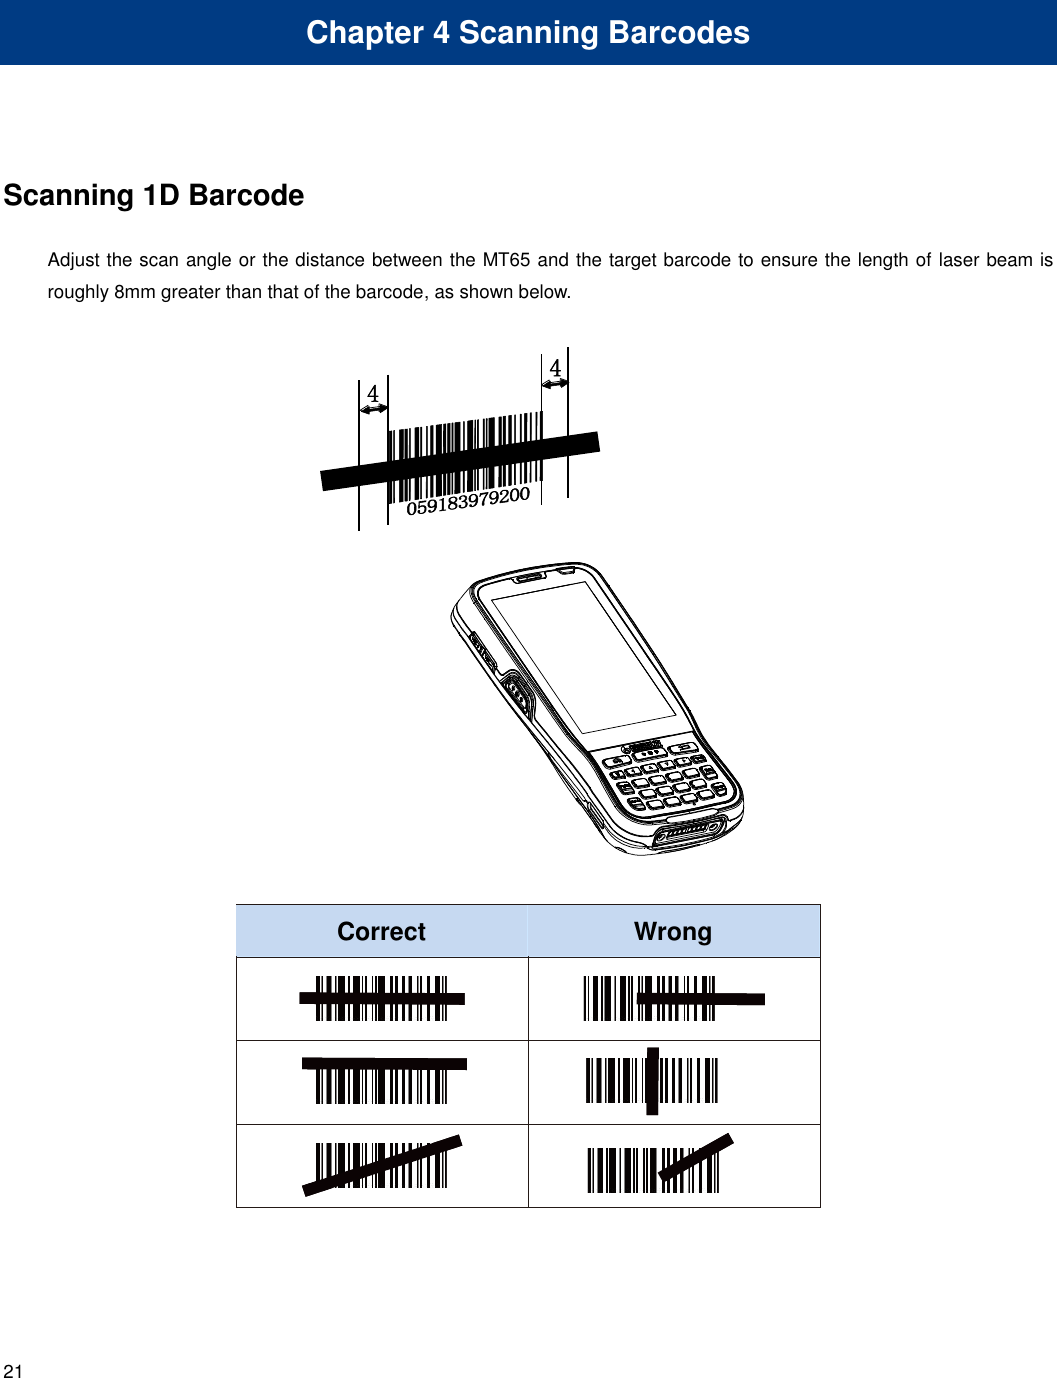  21 Chapter 4 Scanning Barcodes Scanning 1D Barcode Adjust the scan angle or the distance between the MT65 and the target barcode to ensure the length of laser beam is roughly 8mm greater than that of the barcode, as shown below.    正 确的 读码 方 法 错误 的读 码方 法    Correct Wrong 